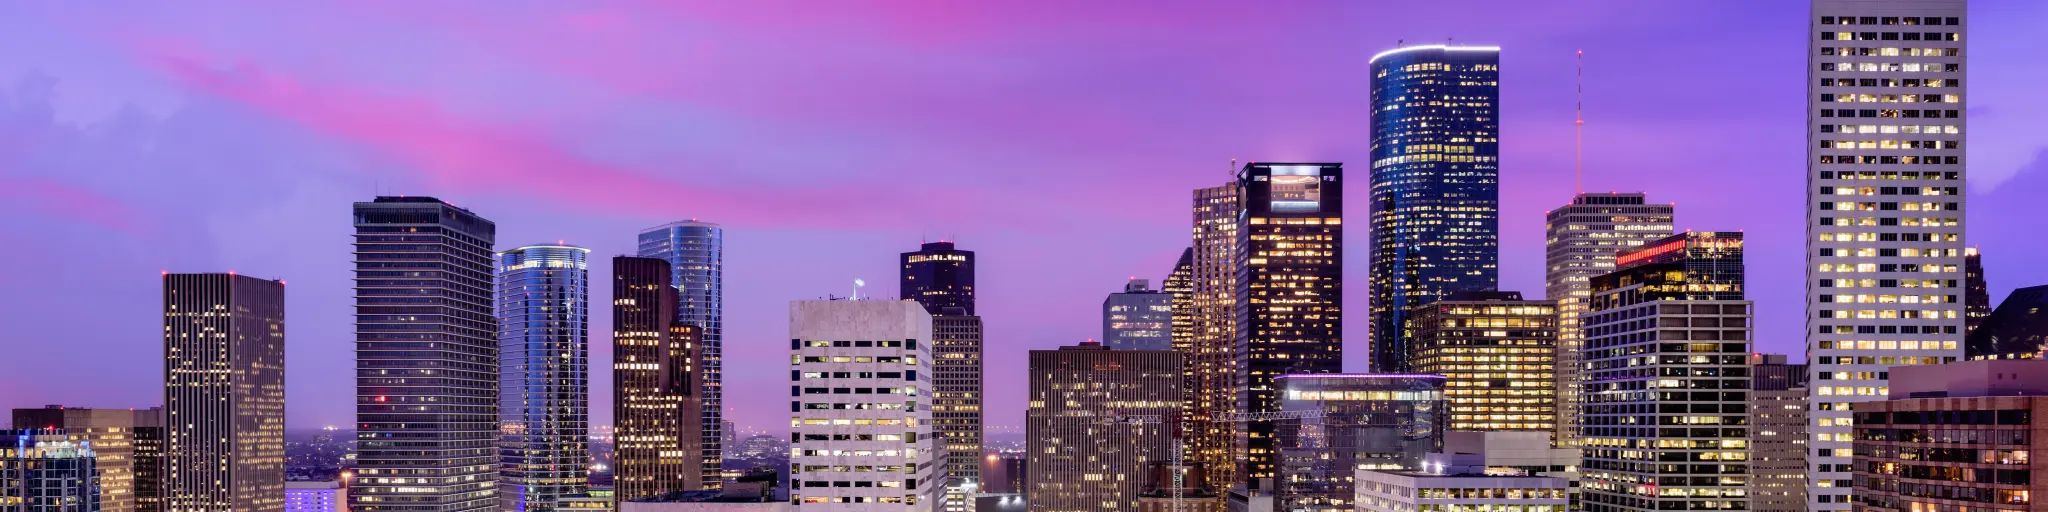 Skyline of the city during a pink and purple sunset with the buildings lit up 